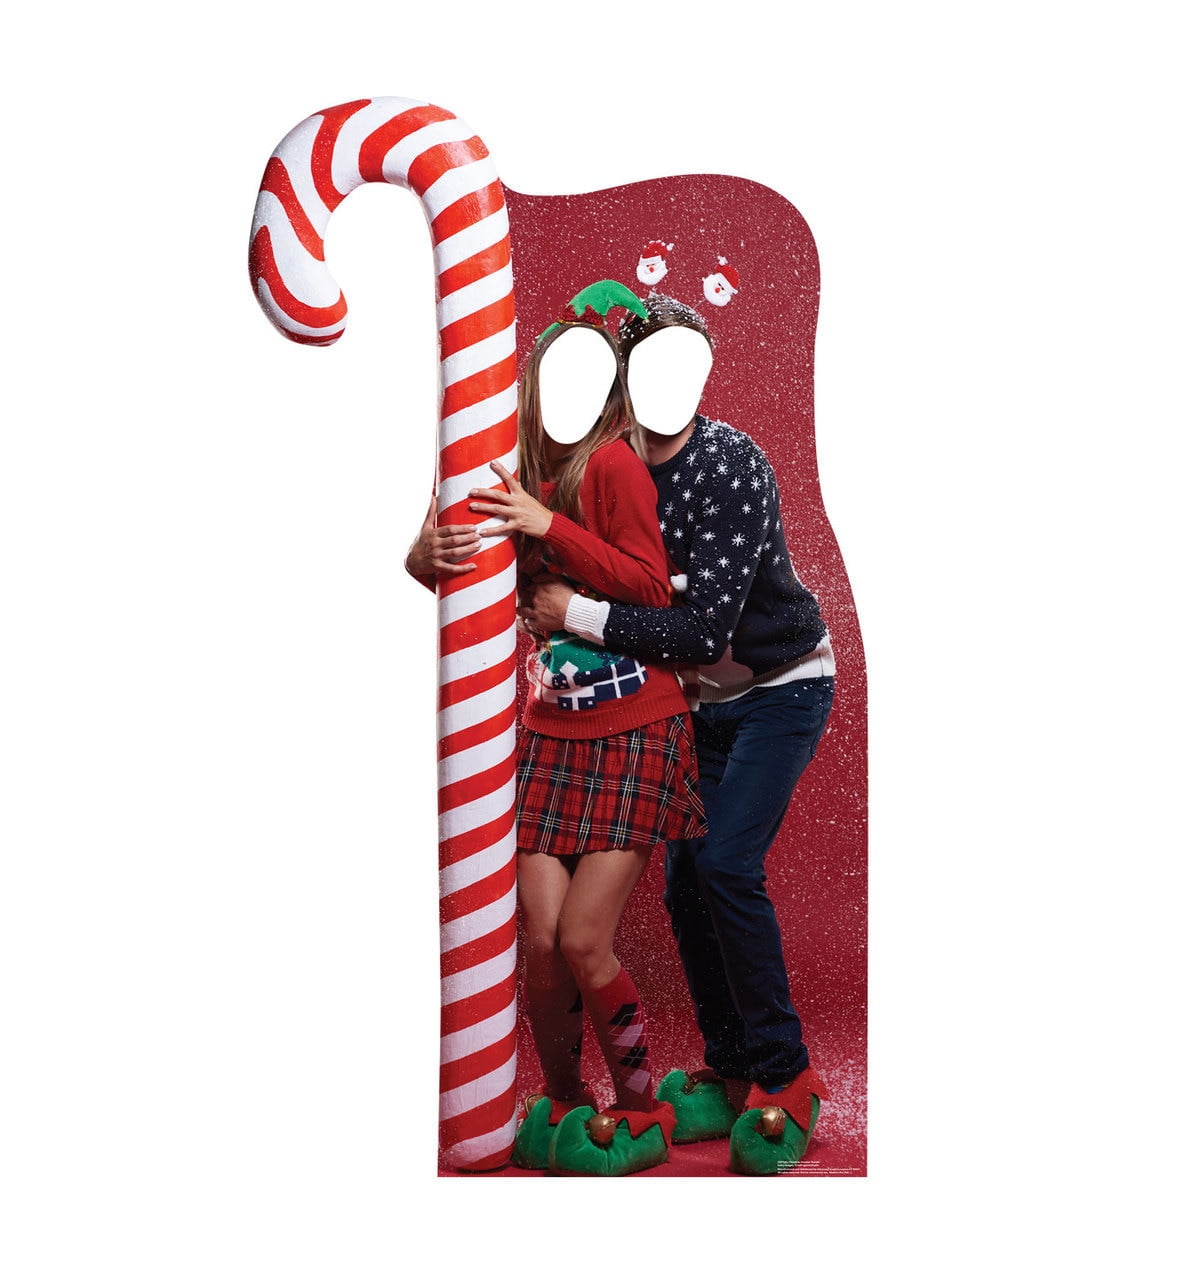 GIANT CANDY CANE & PRESENTS Christmas CARDBOARD CUTOUT Standup Standee Poster 